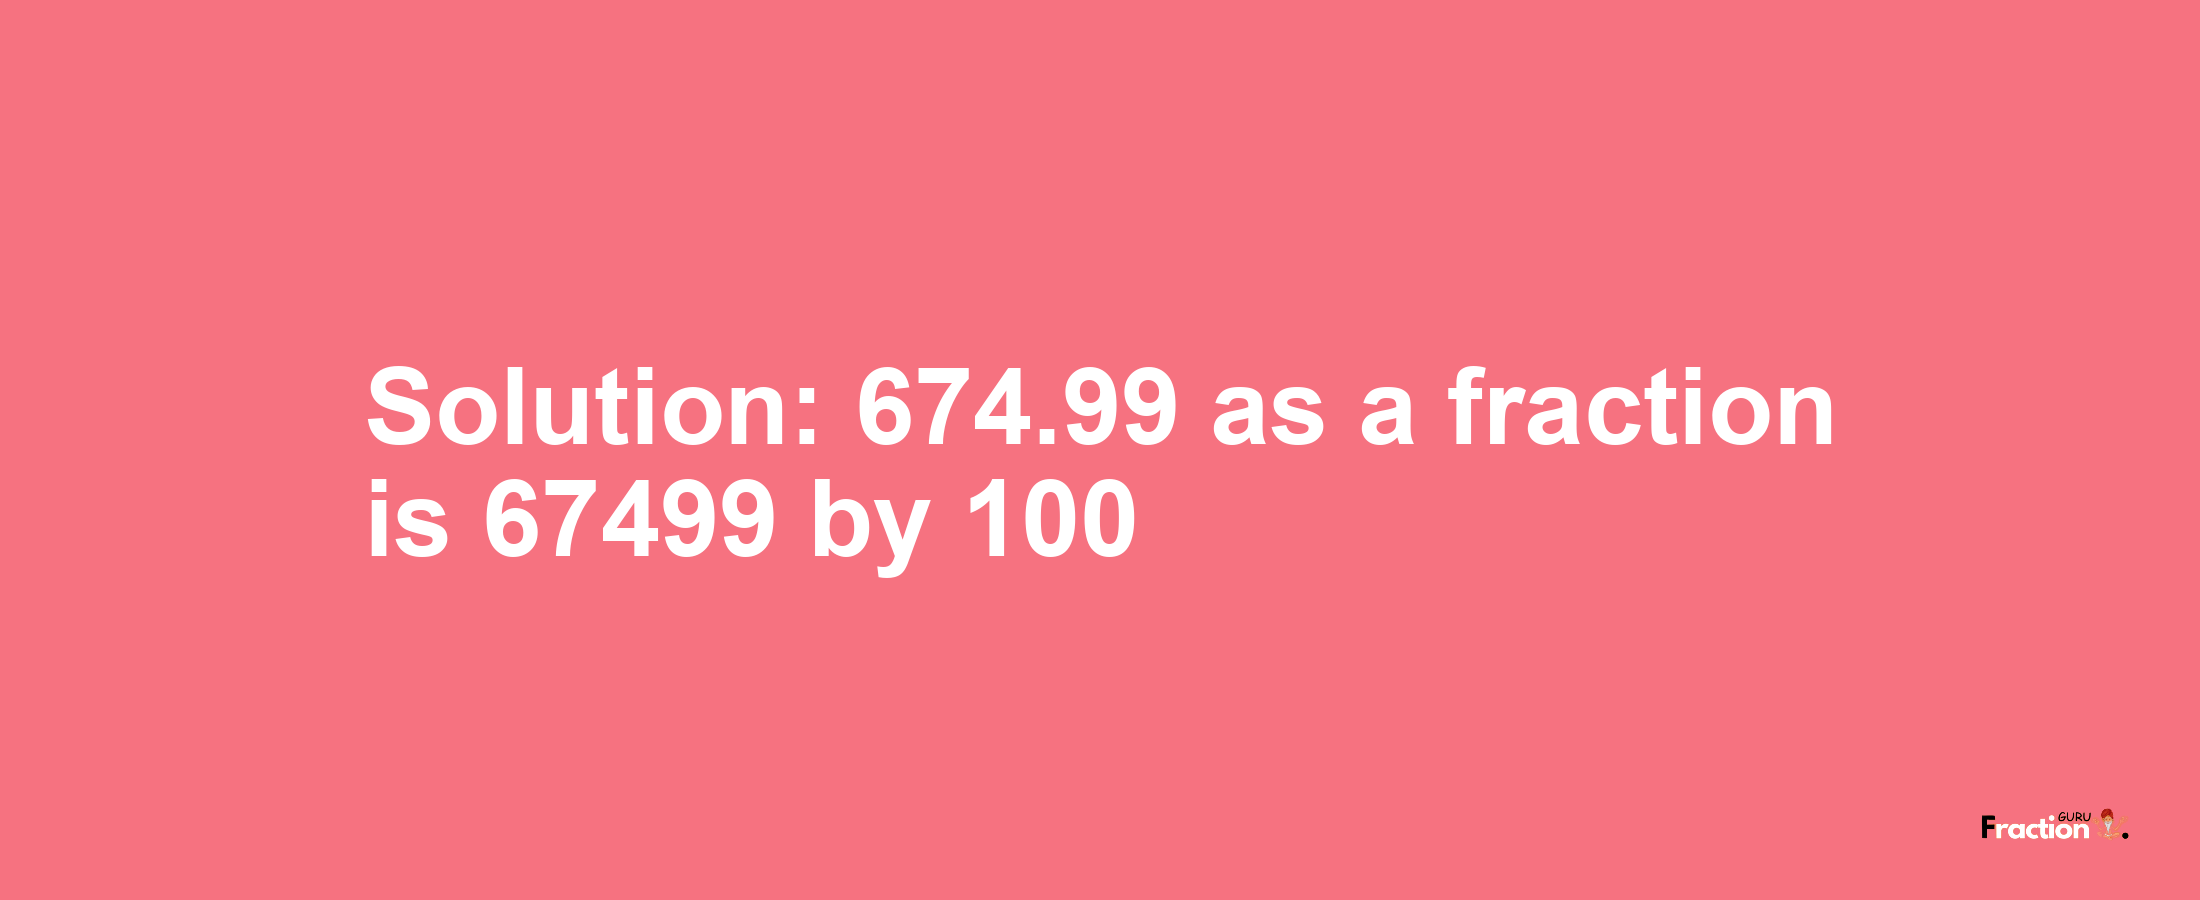 Solution:674.99 as a fraction is 67499/100